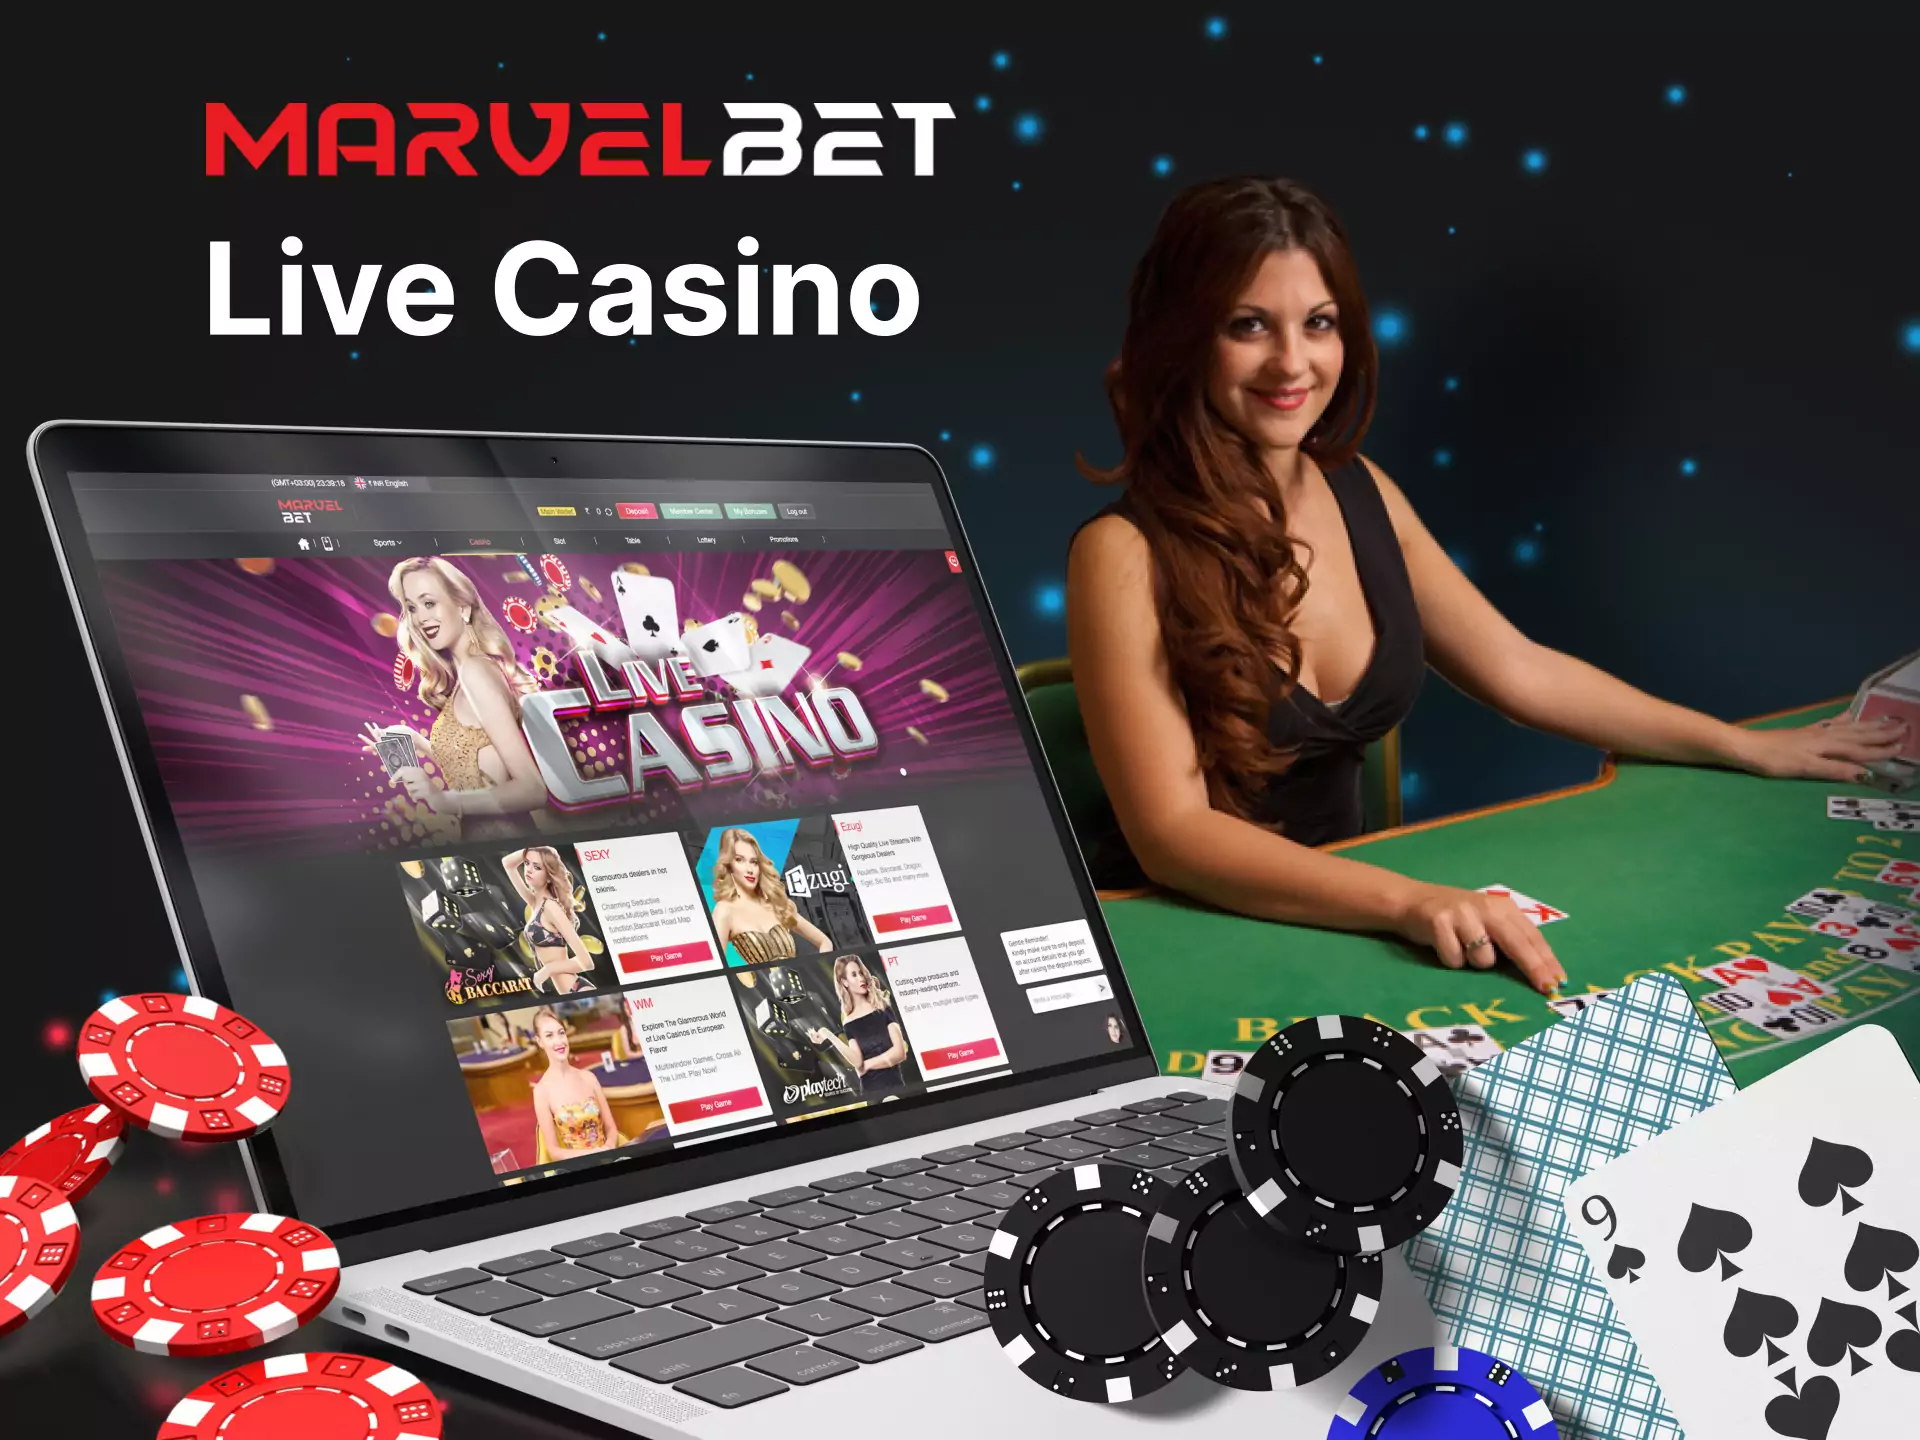 In the Marvelbet Live Casino, you can play with real dealers and players.